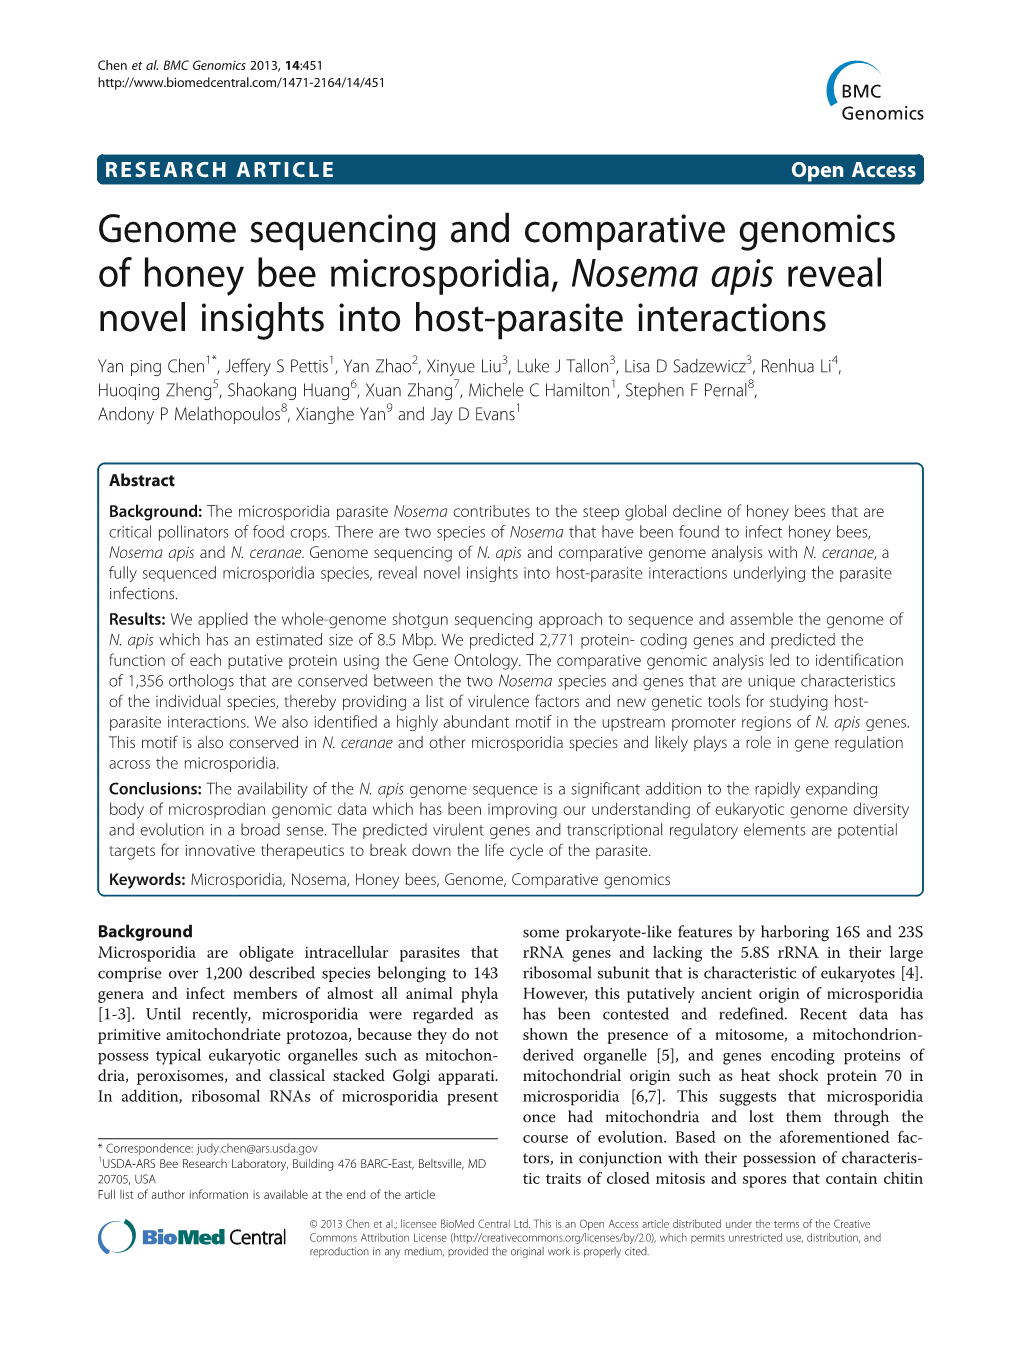 Genome Sequencing and Comparative Genomics of Honey Bee